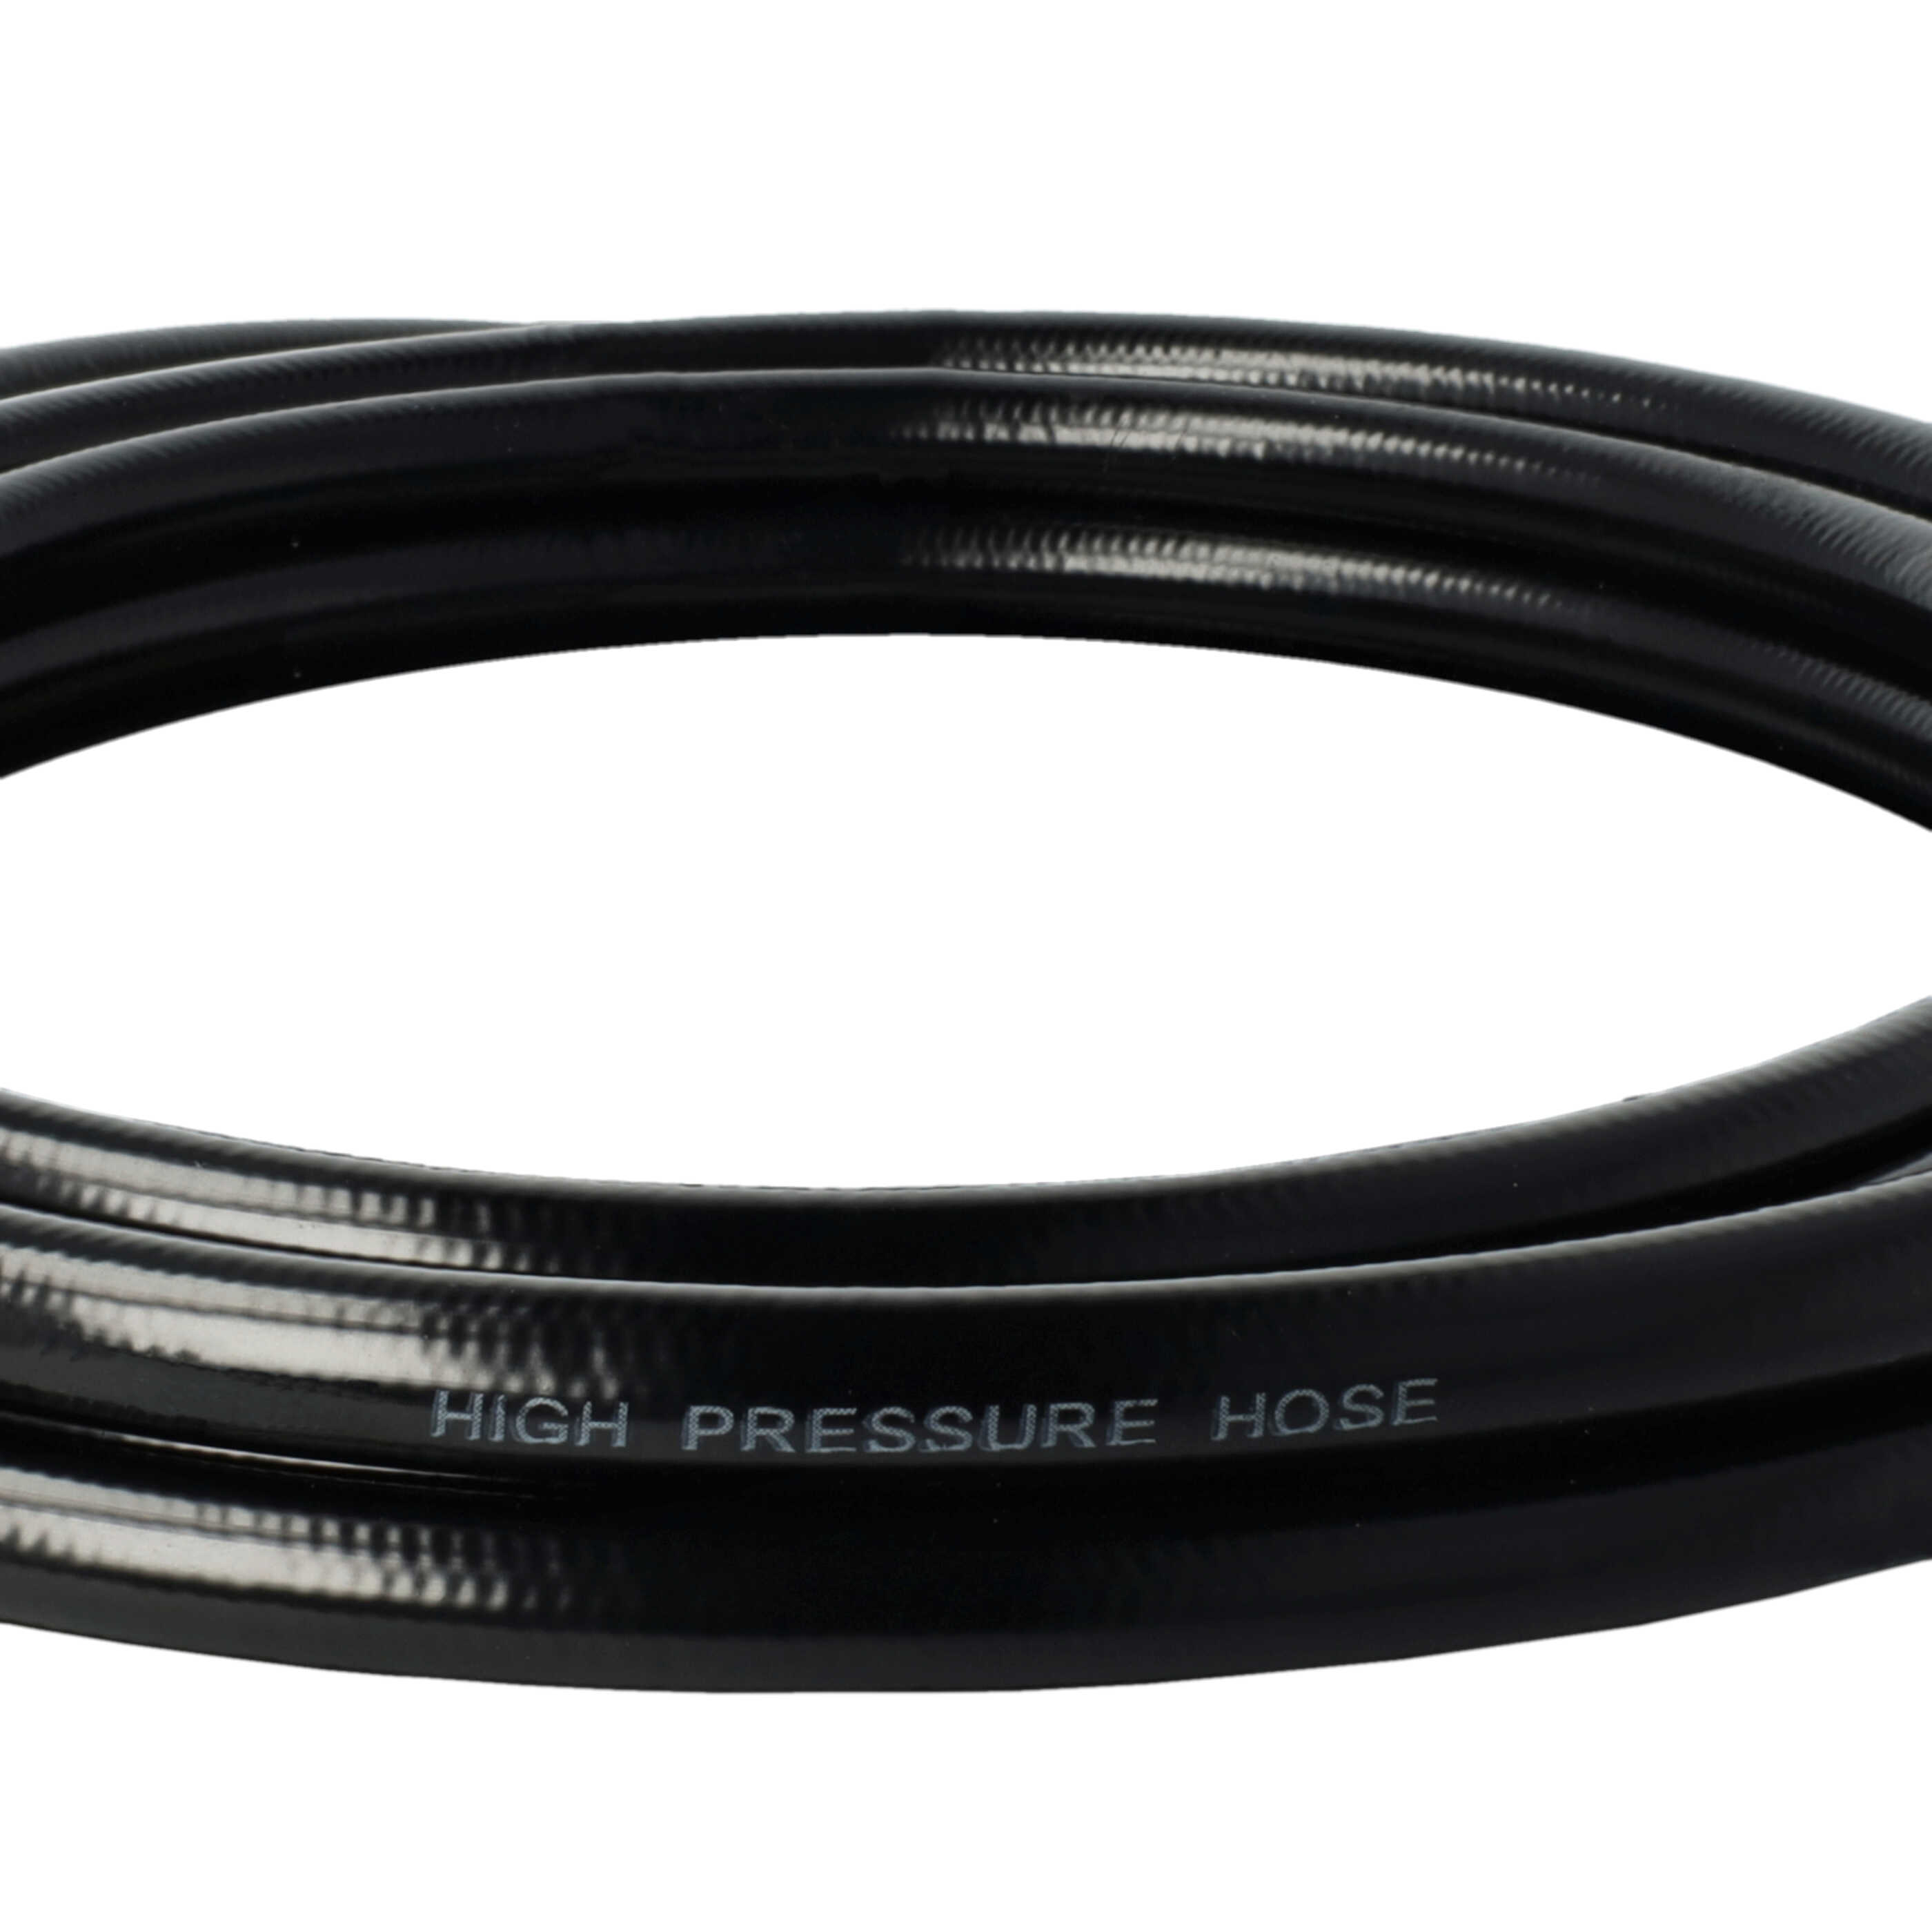 vhbw 3 m Extension Hose High-Pressure Cleaner with M22 x 1.5 Threaded Connection Black